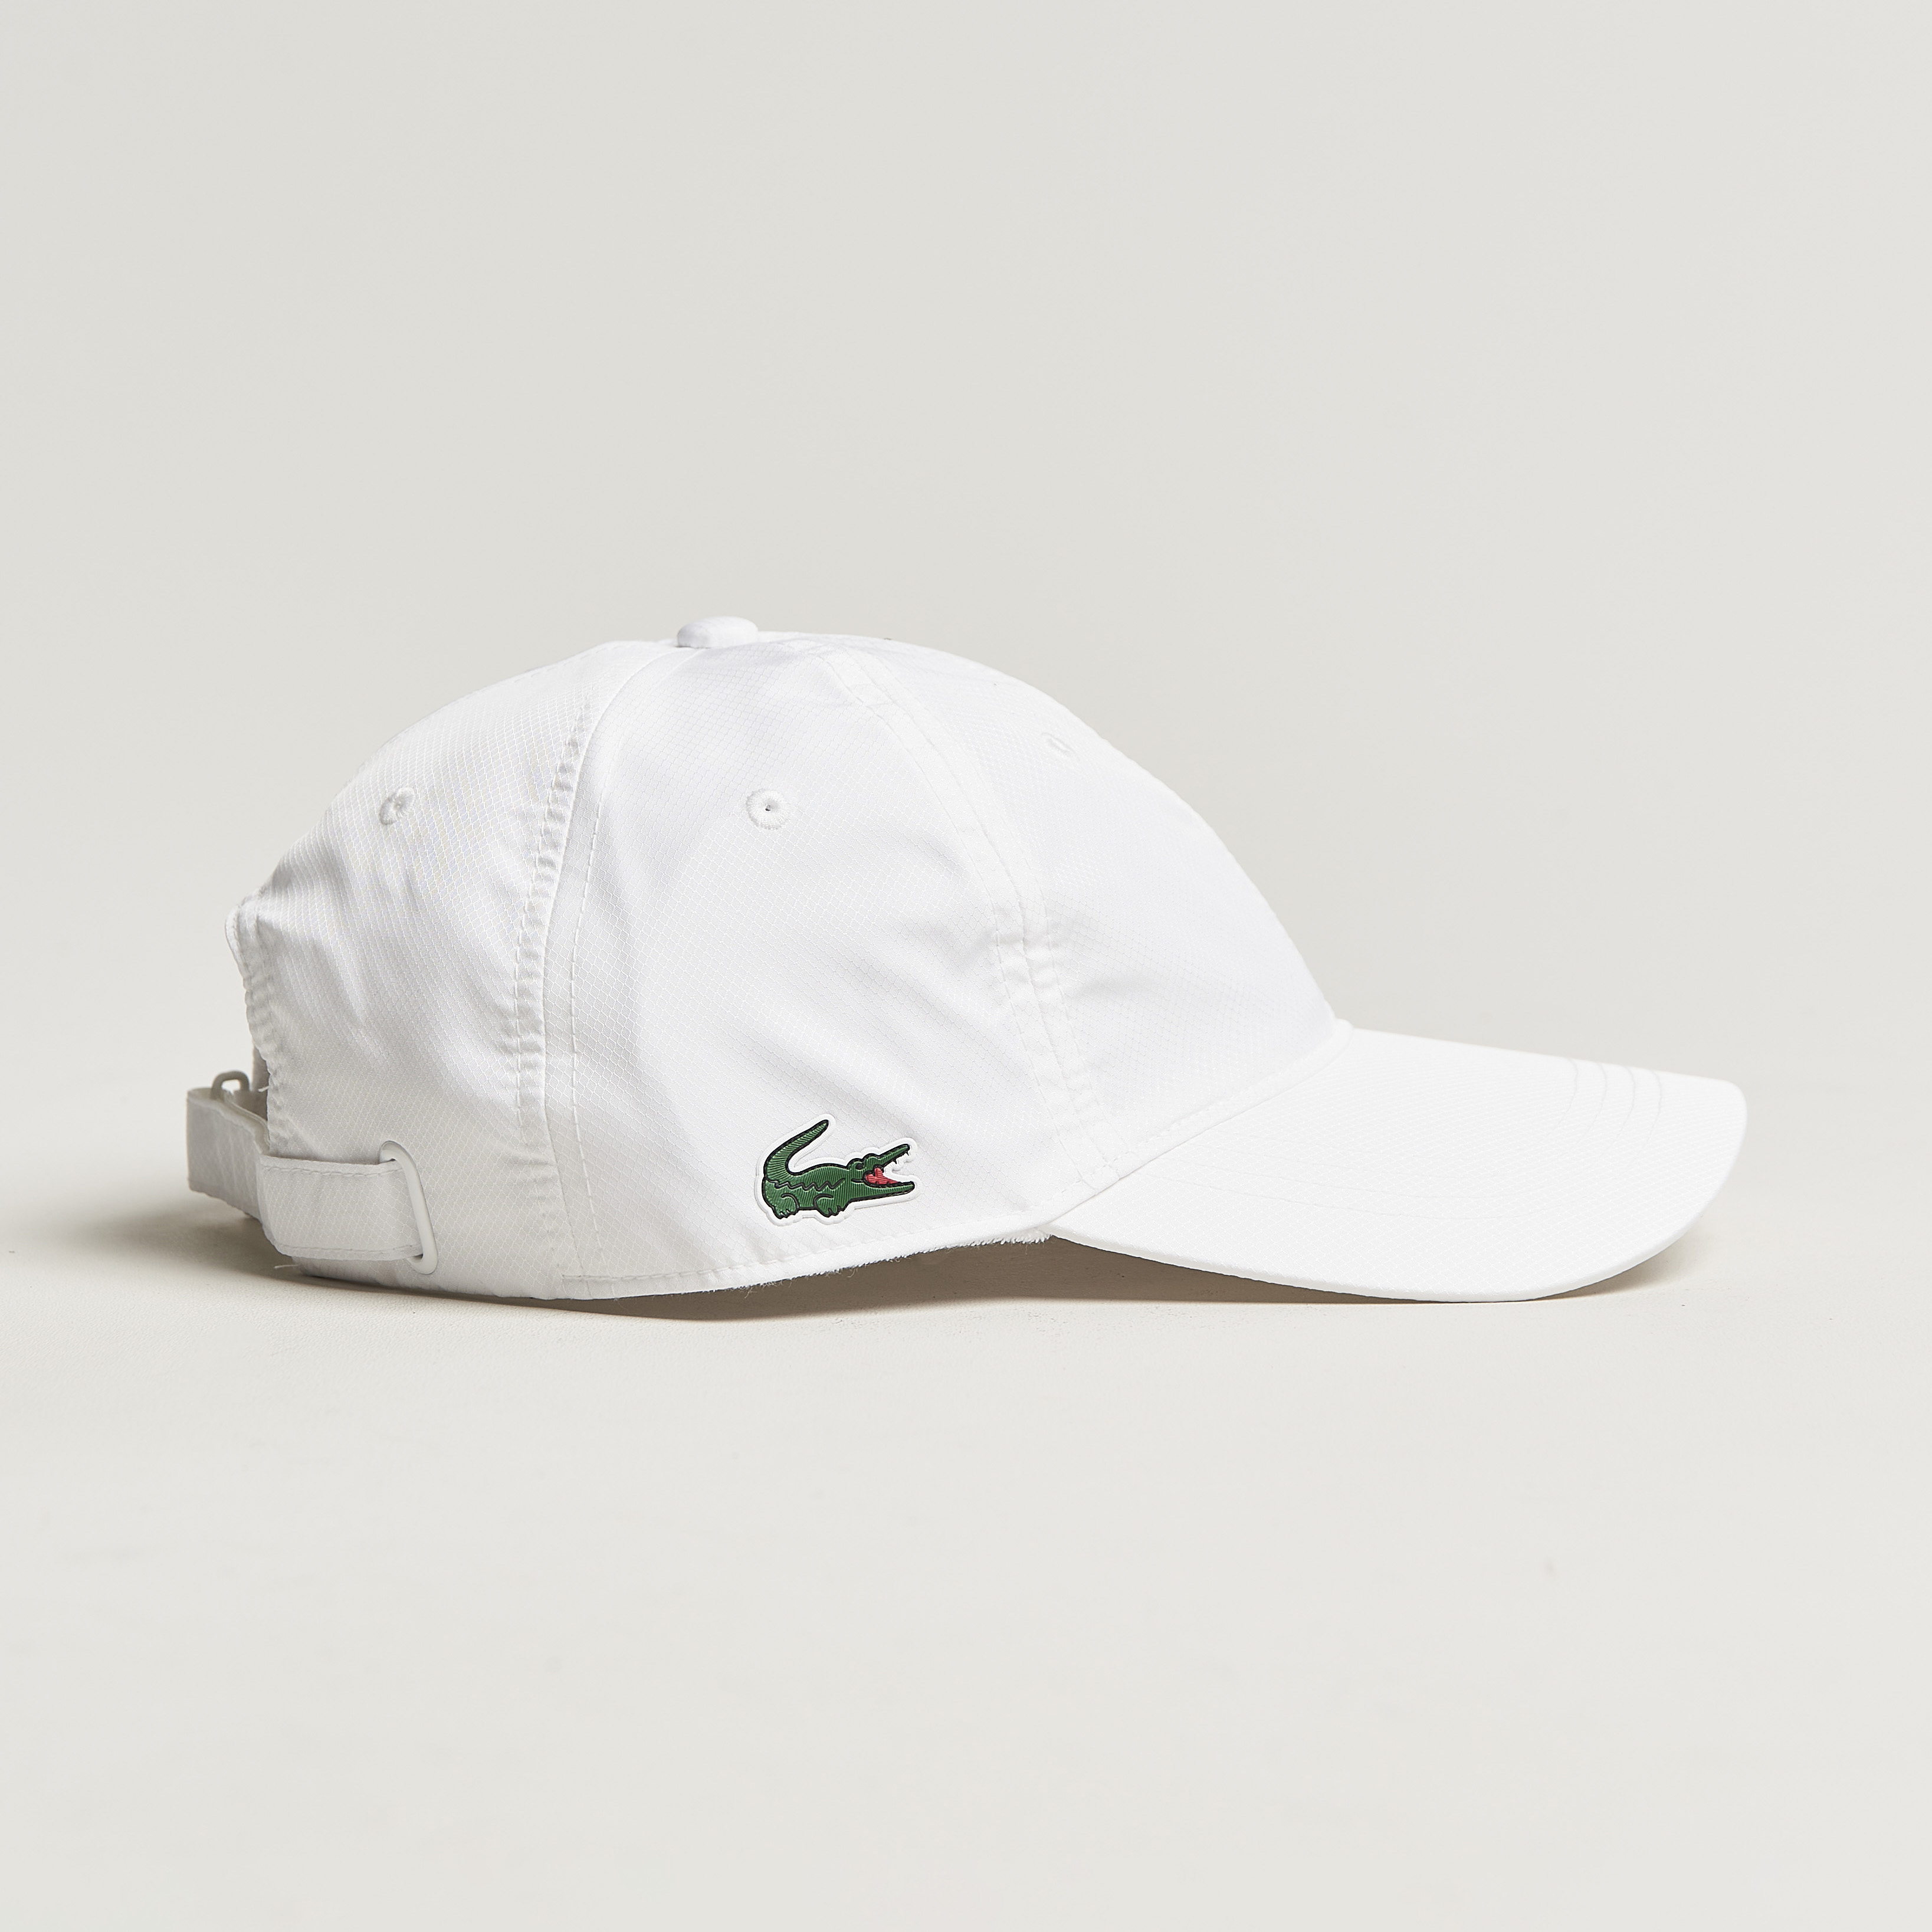 Lacoste Sport at White Cap Sports